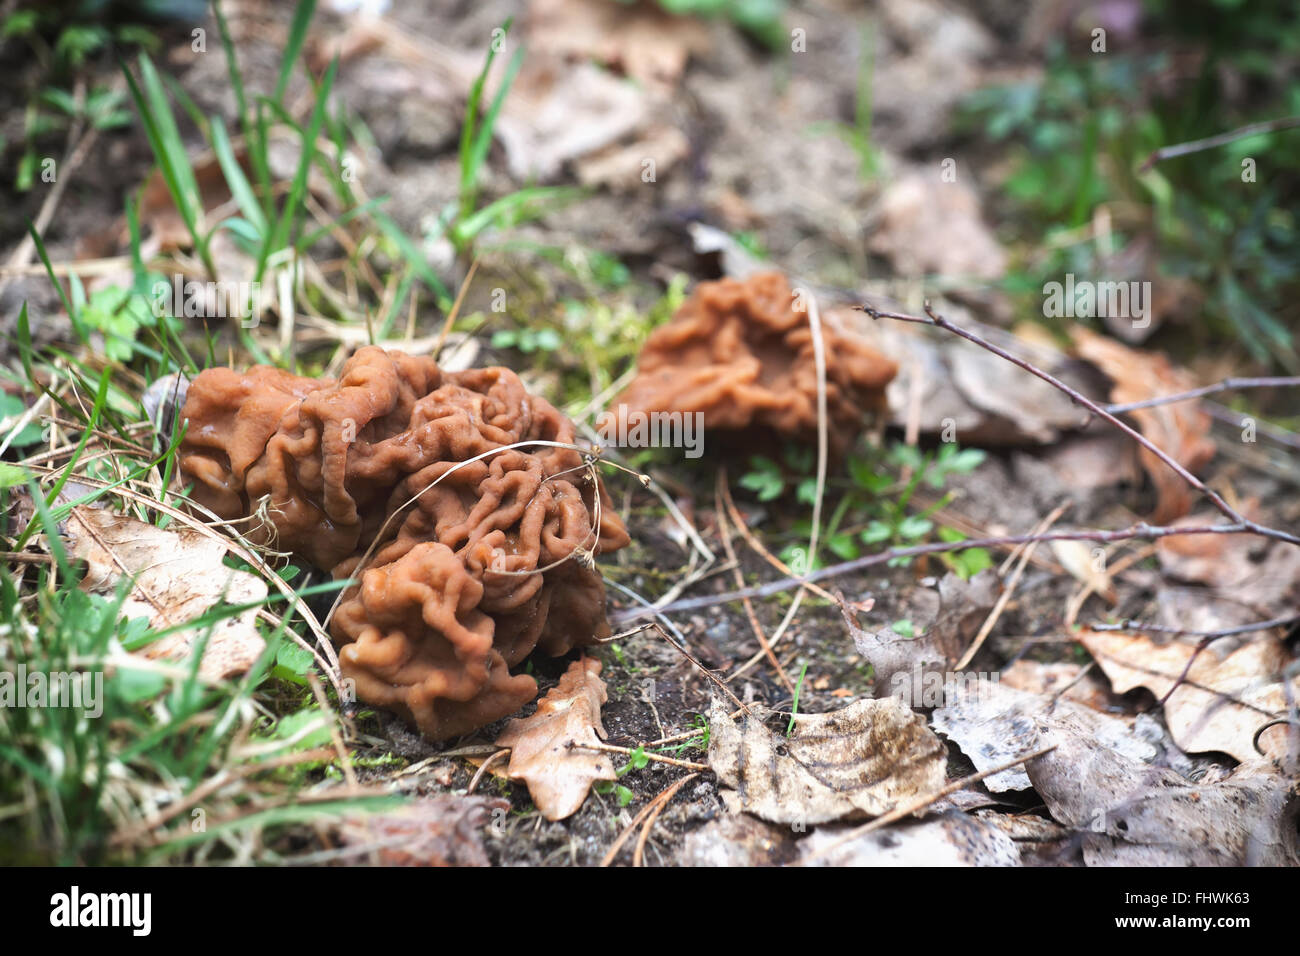 Gyromitra are highly poisonous when raw due to the presence of Gyromitrin, although some species are edible when cooked. Stock Photo